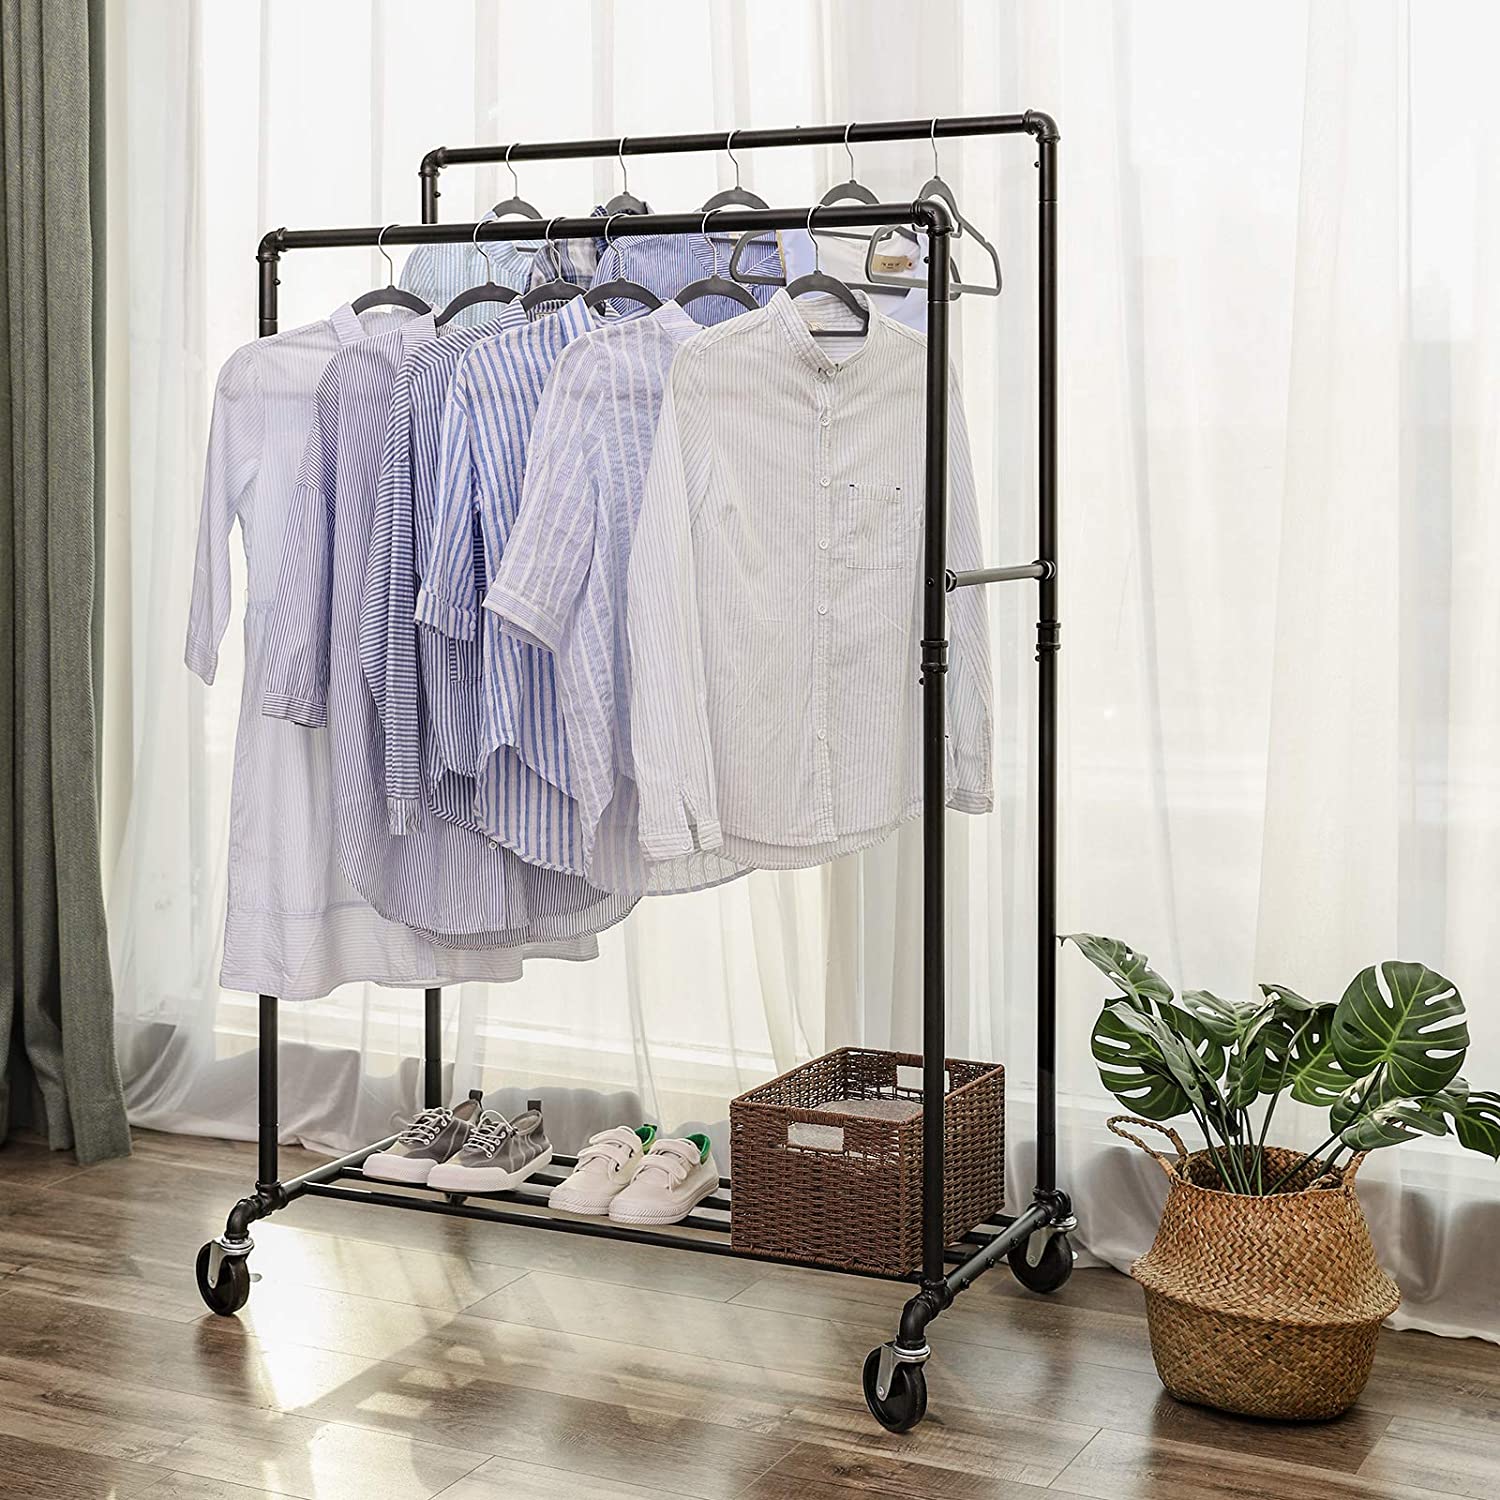 Nancy's Clothes Rack on Wheels - Double Bar Up to 110 kg - Rollable Wardrobe - Mobile Coat Rack - Clothes Racks